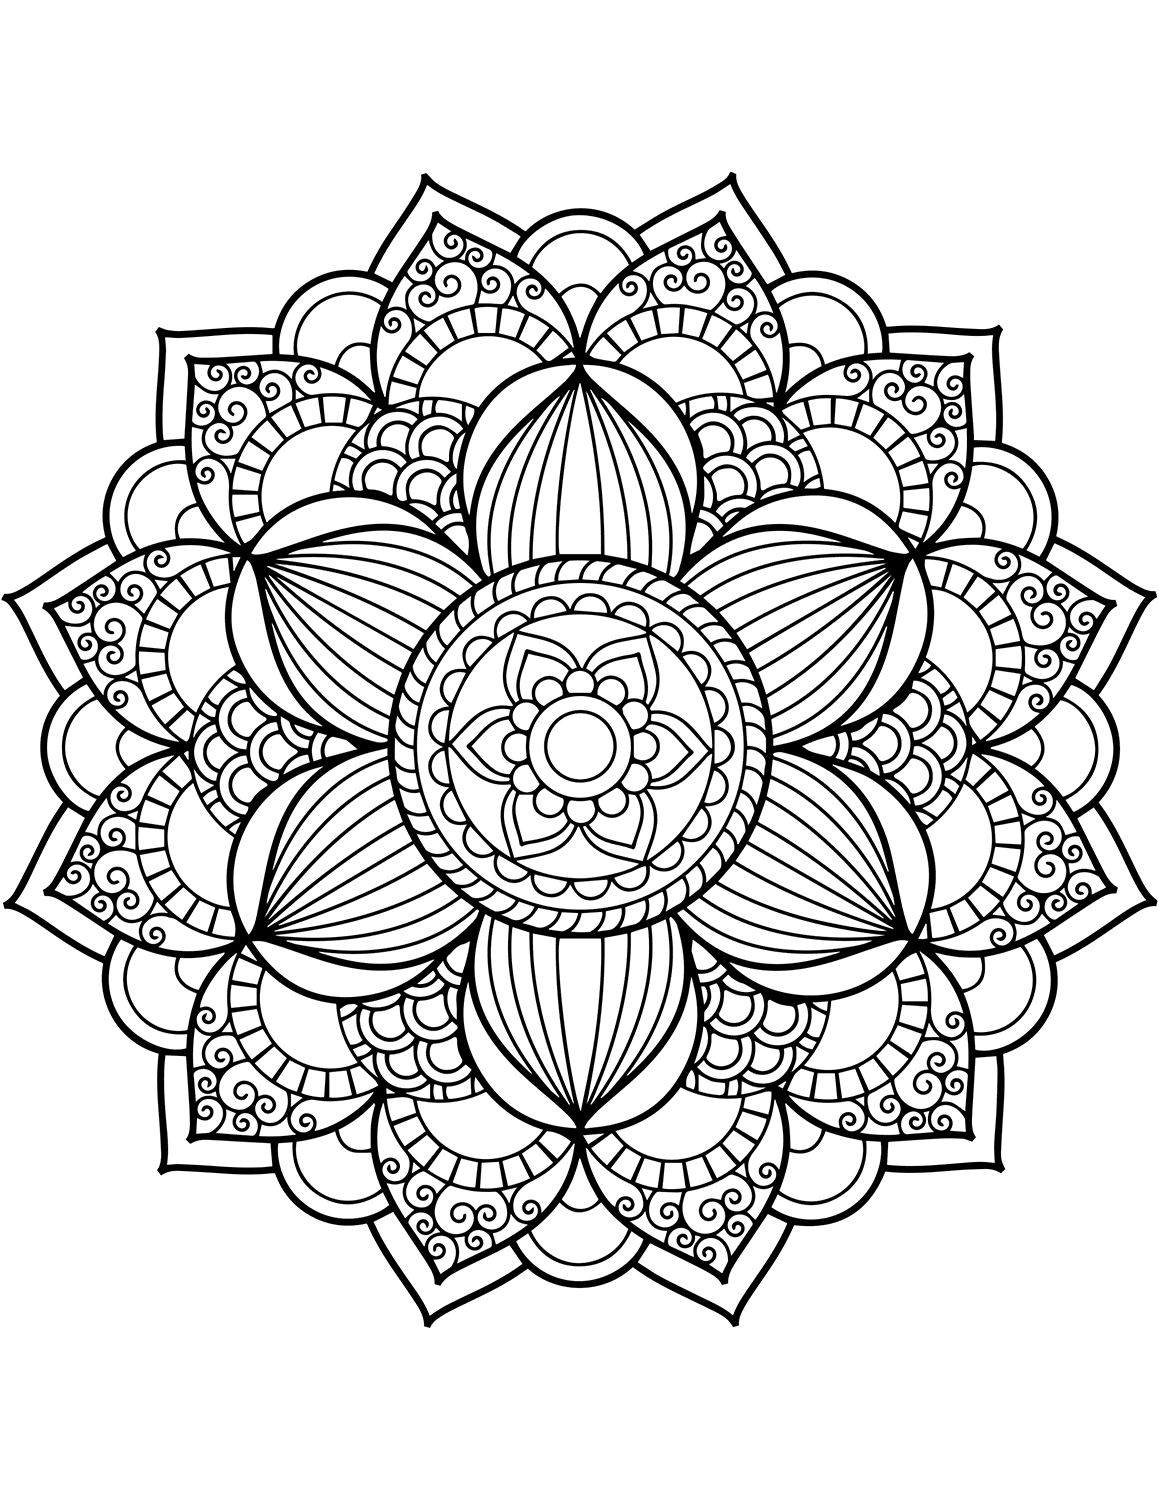 Download Mandala Flower Coloring Page - Free Printable Coloring Pages for Kids